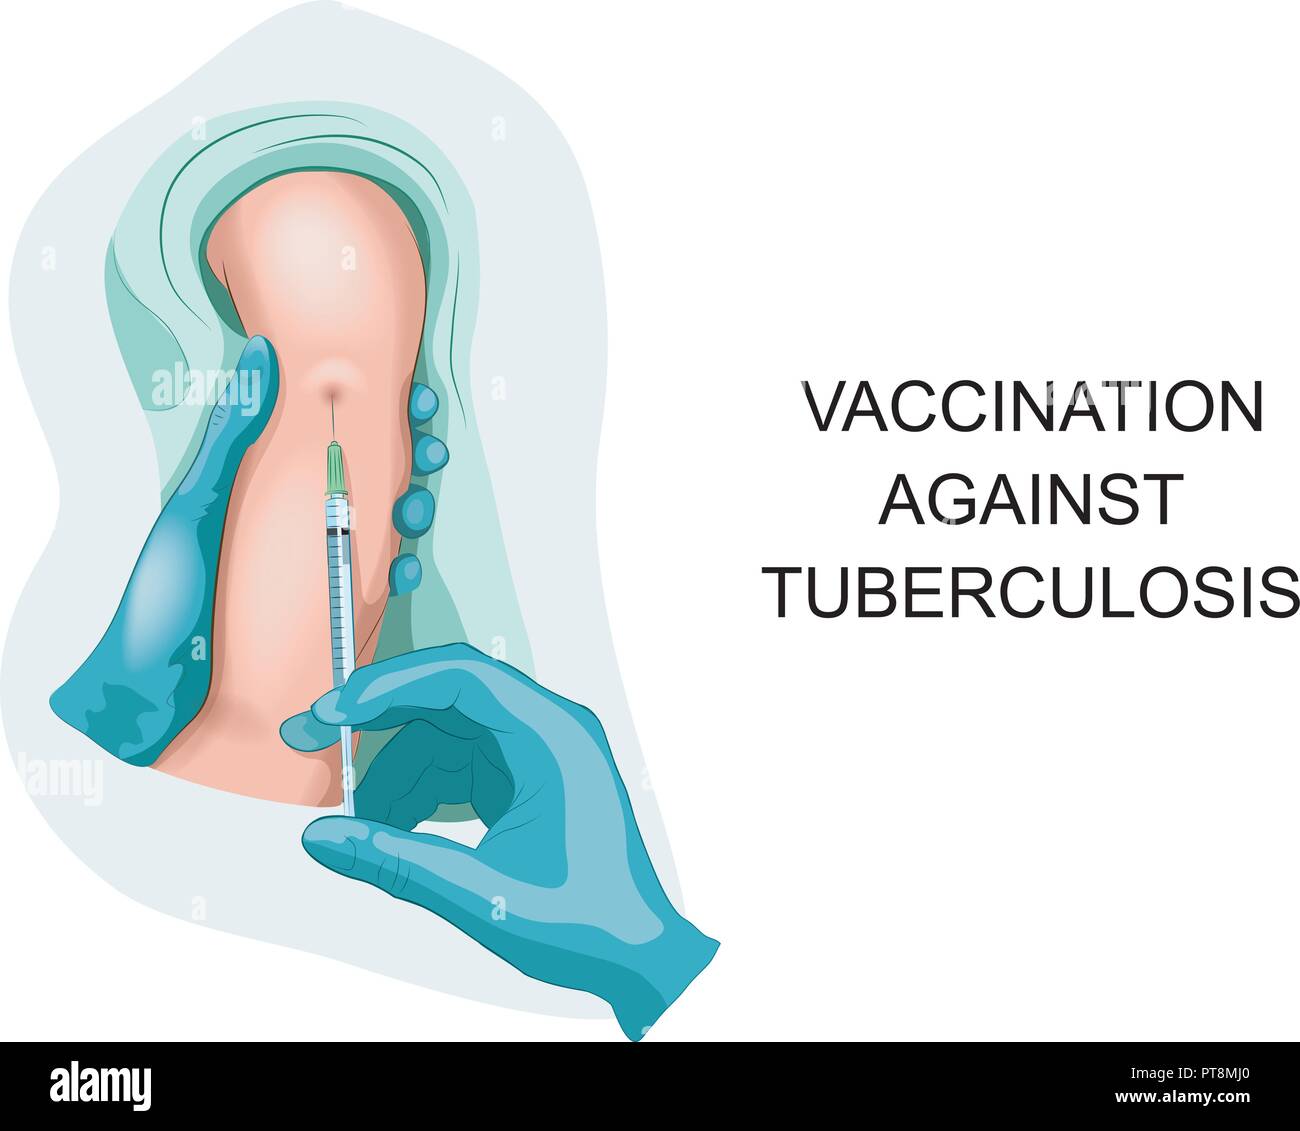 vector illustration of child vaccination against tuberculosis. Stock Vector